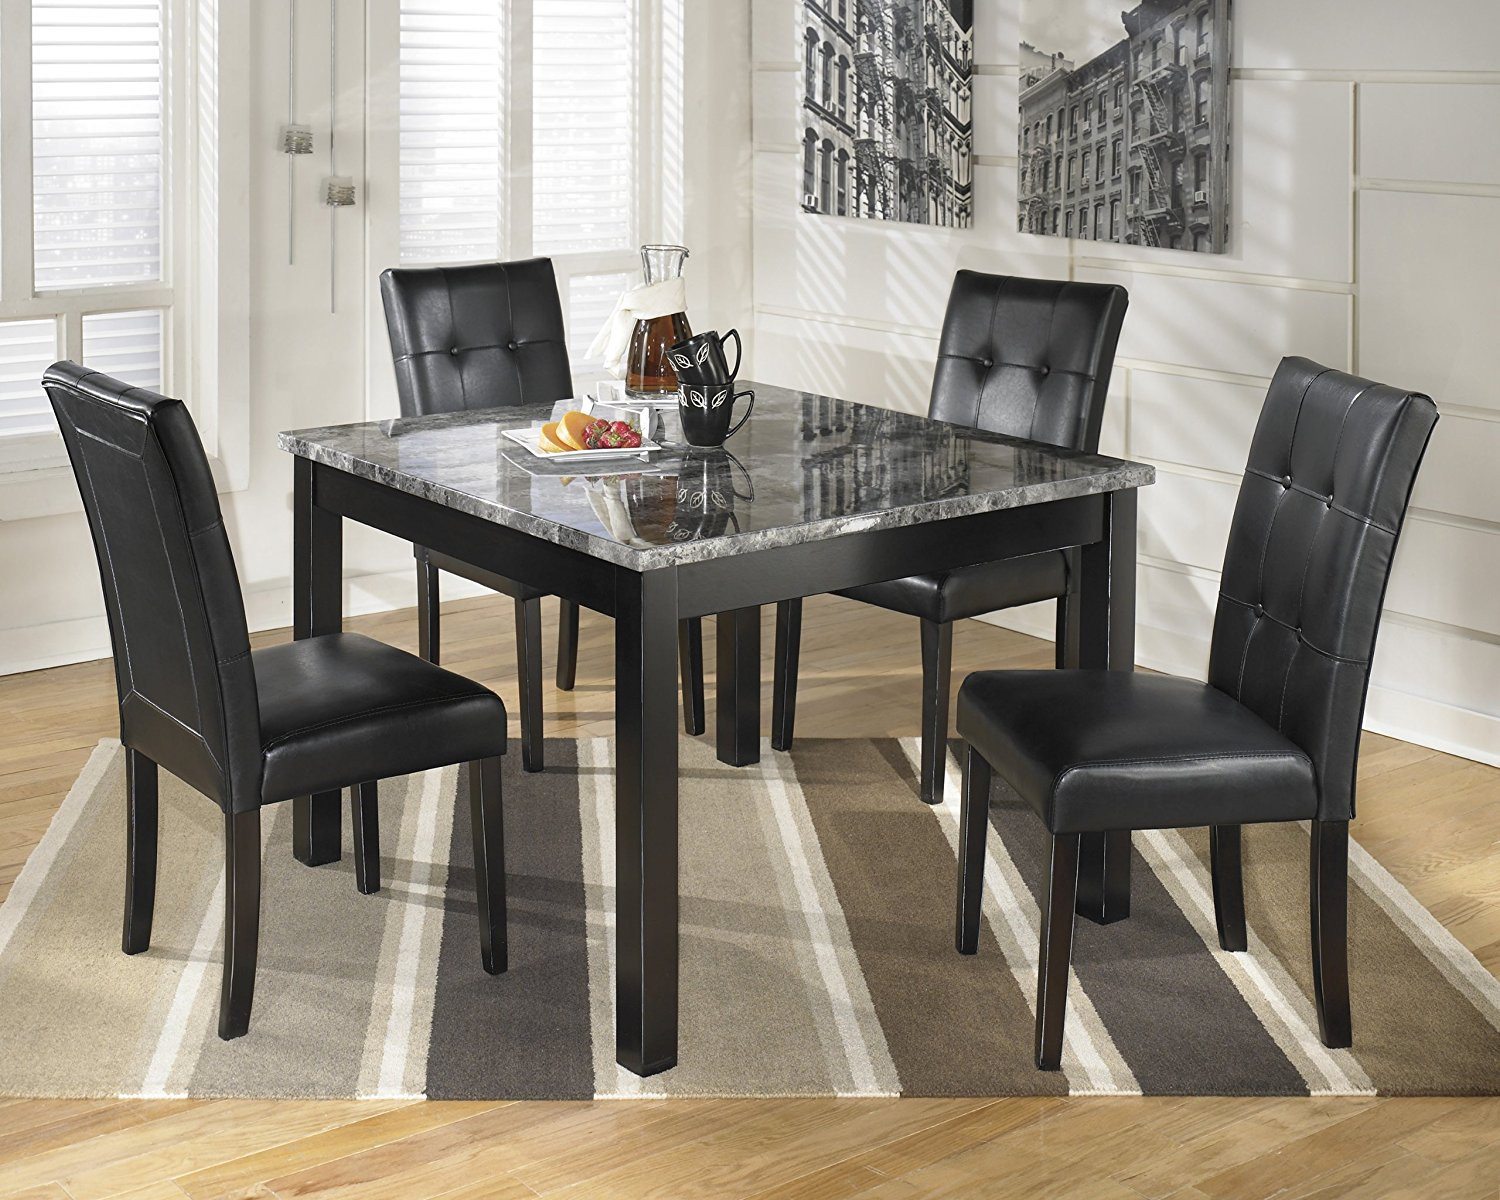 Cheap Small Kitchen Table Sets
 Square Dining Room Table Sets & Minimalist Dining Room